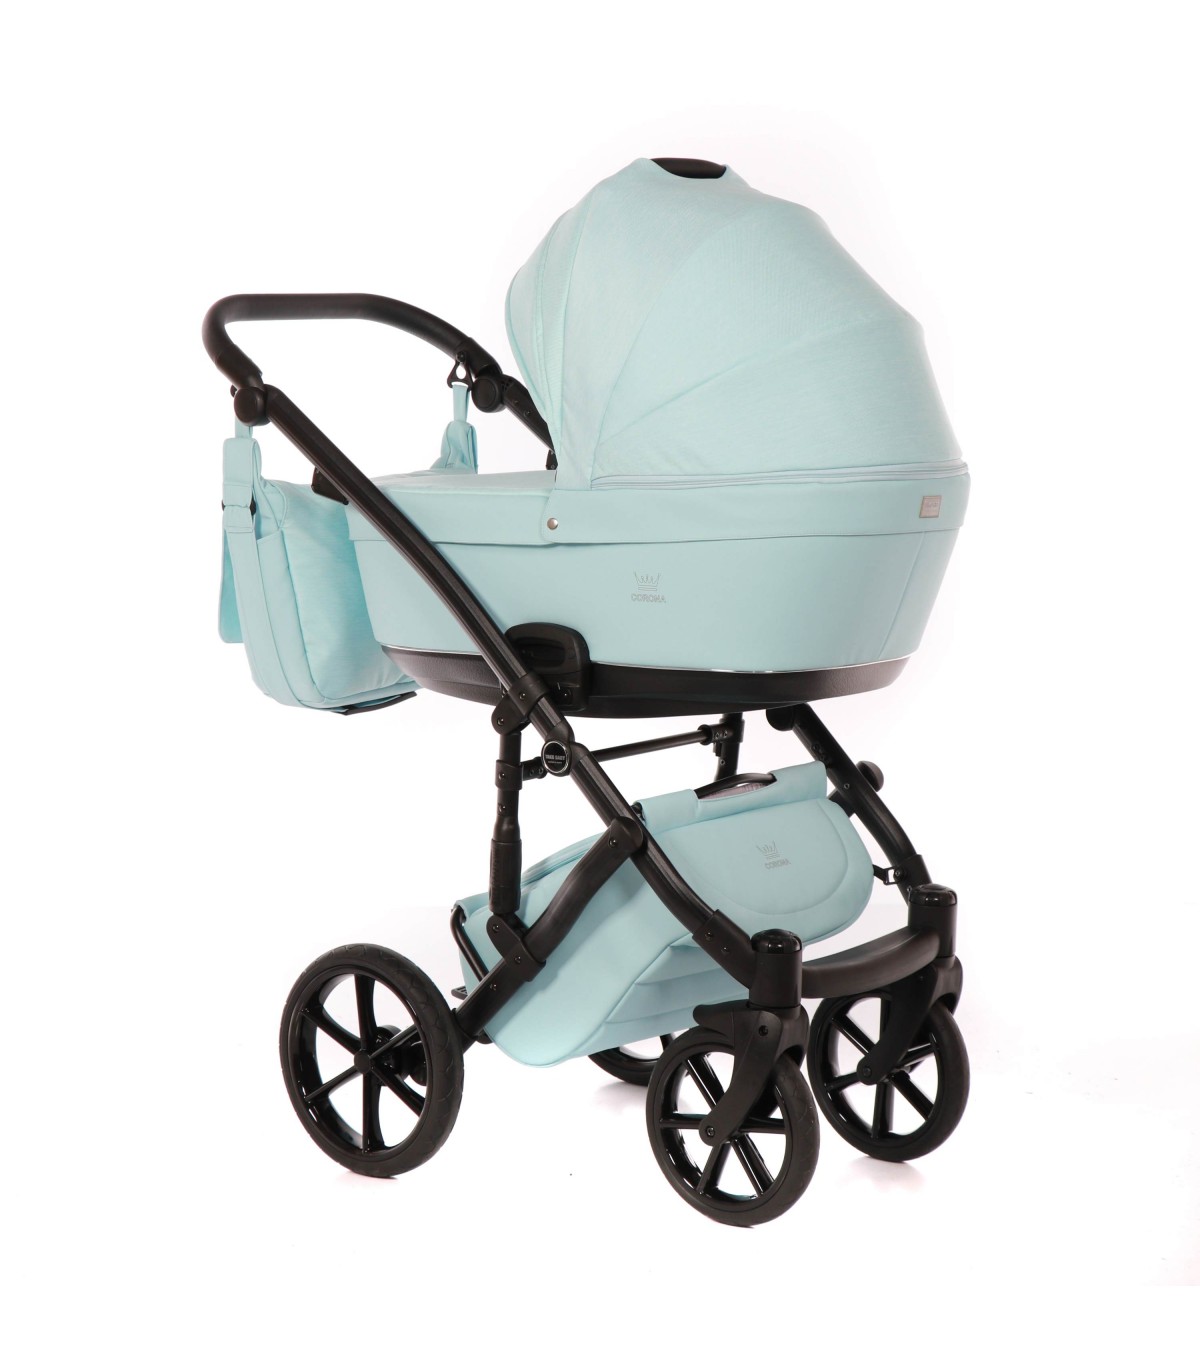 3in1 travel system